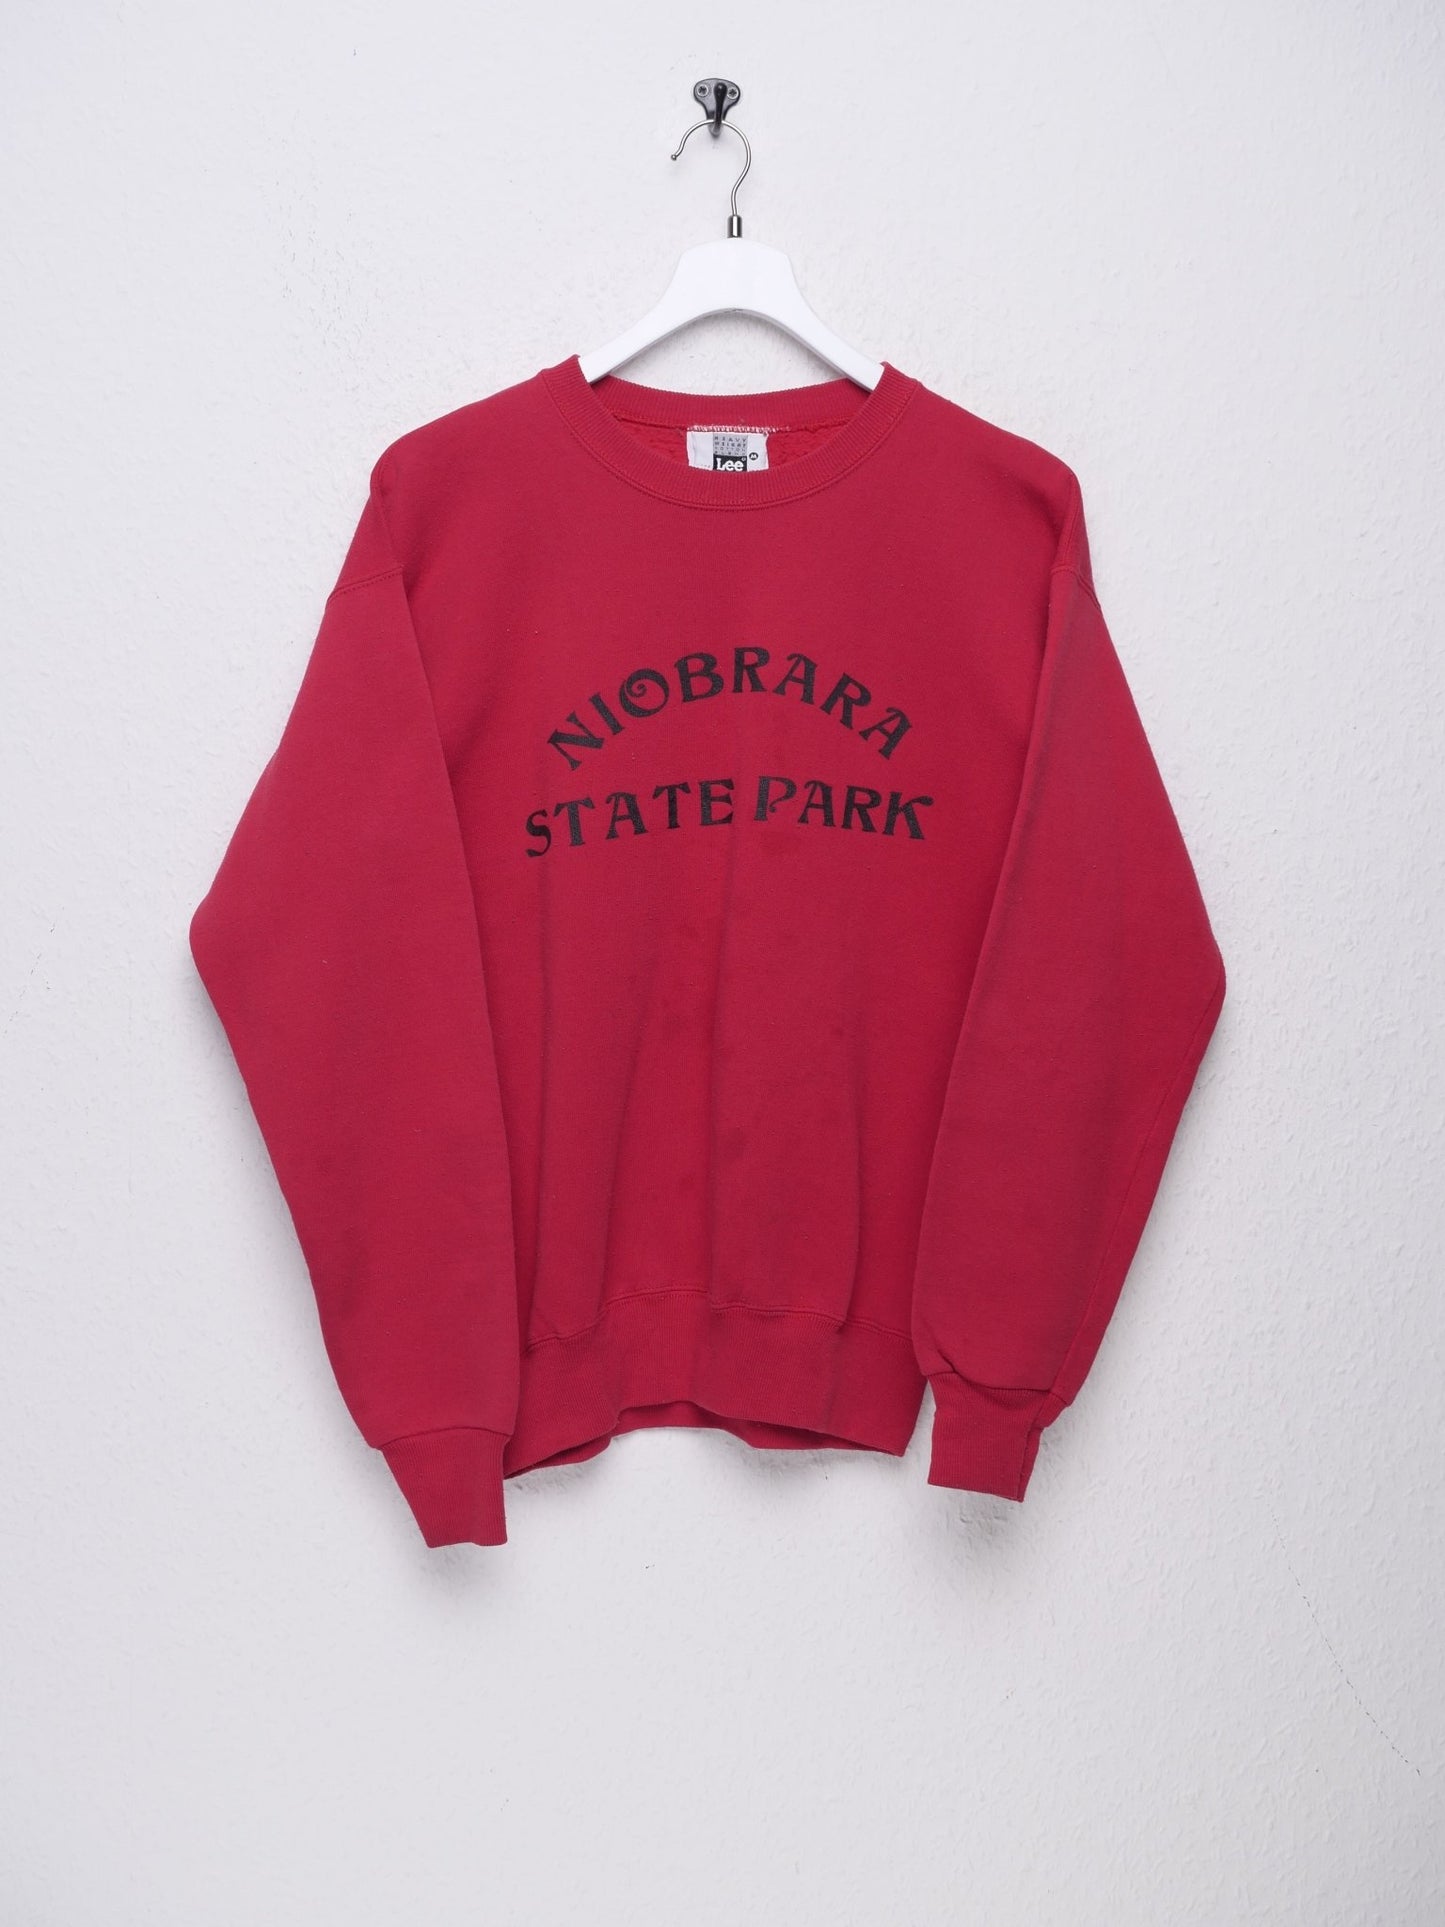 Lee 'Niobrara State Park' printed Spellout red Sweater - Peeces